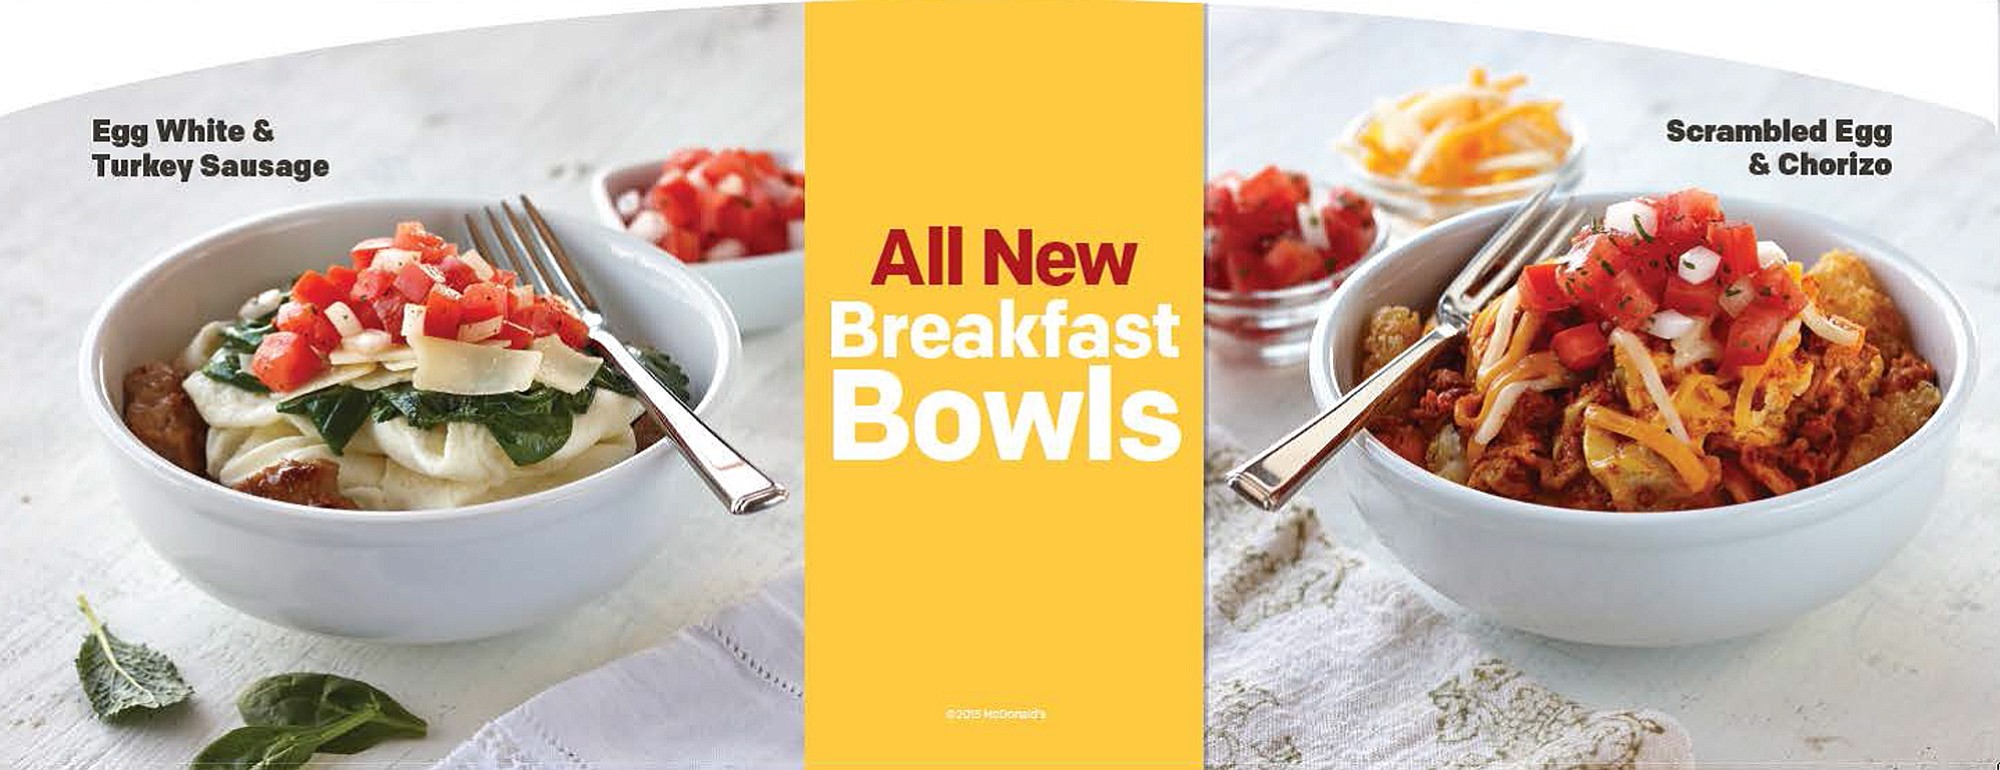 This product image provided by McDonald's advertises the restaurant chain's new breakfast bowls, including Egg White and Turkey Sausage, which contains kale, left, and Scrambled Egg and Chorizo.